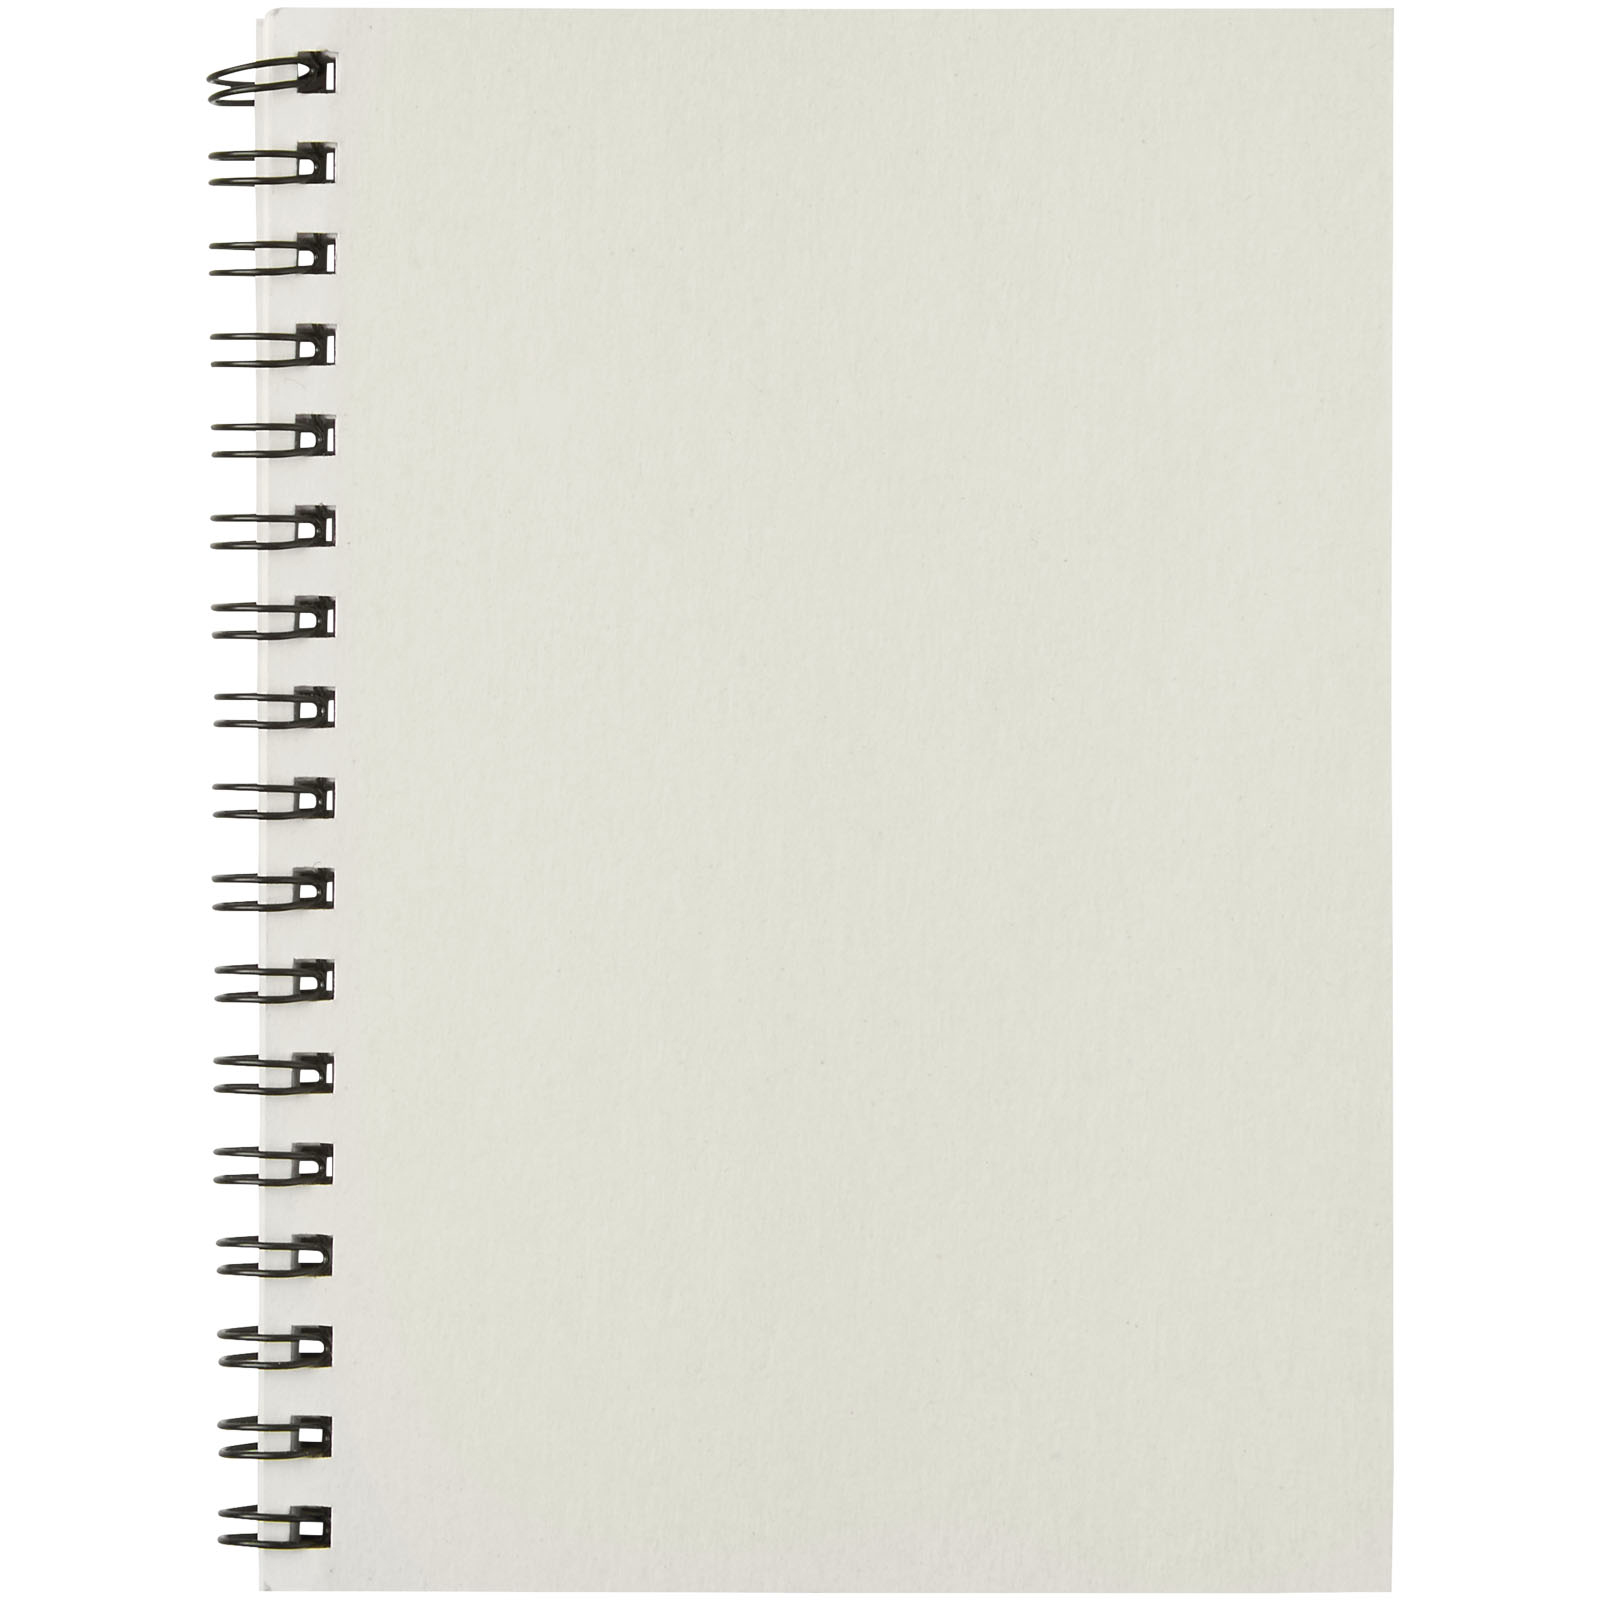 Advertising Soft cover notebooks - Desk-Mate® A6 colour spiral notebook - 1